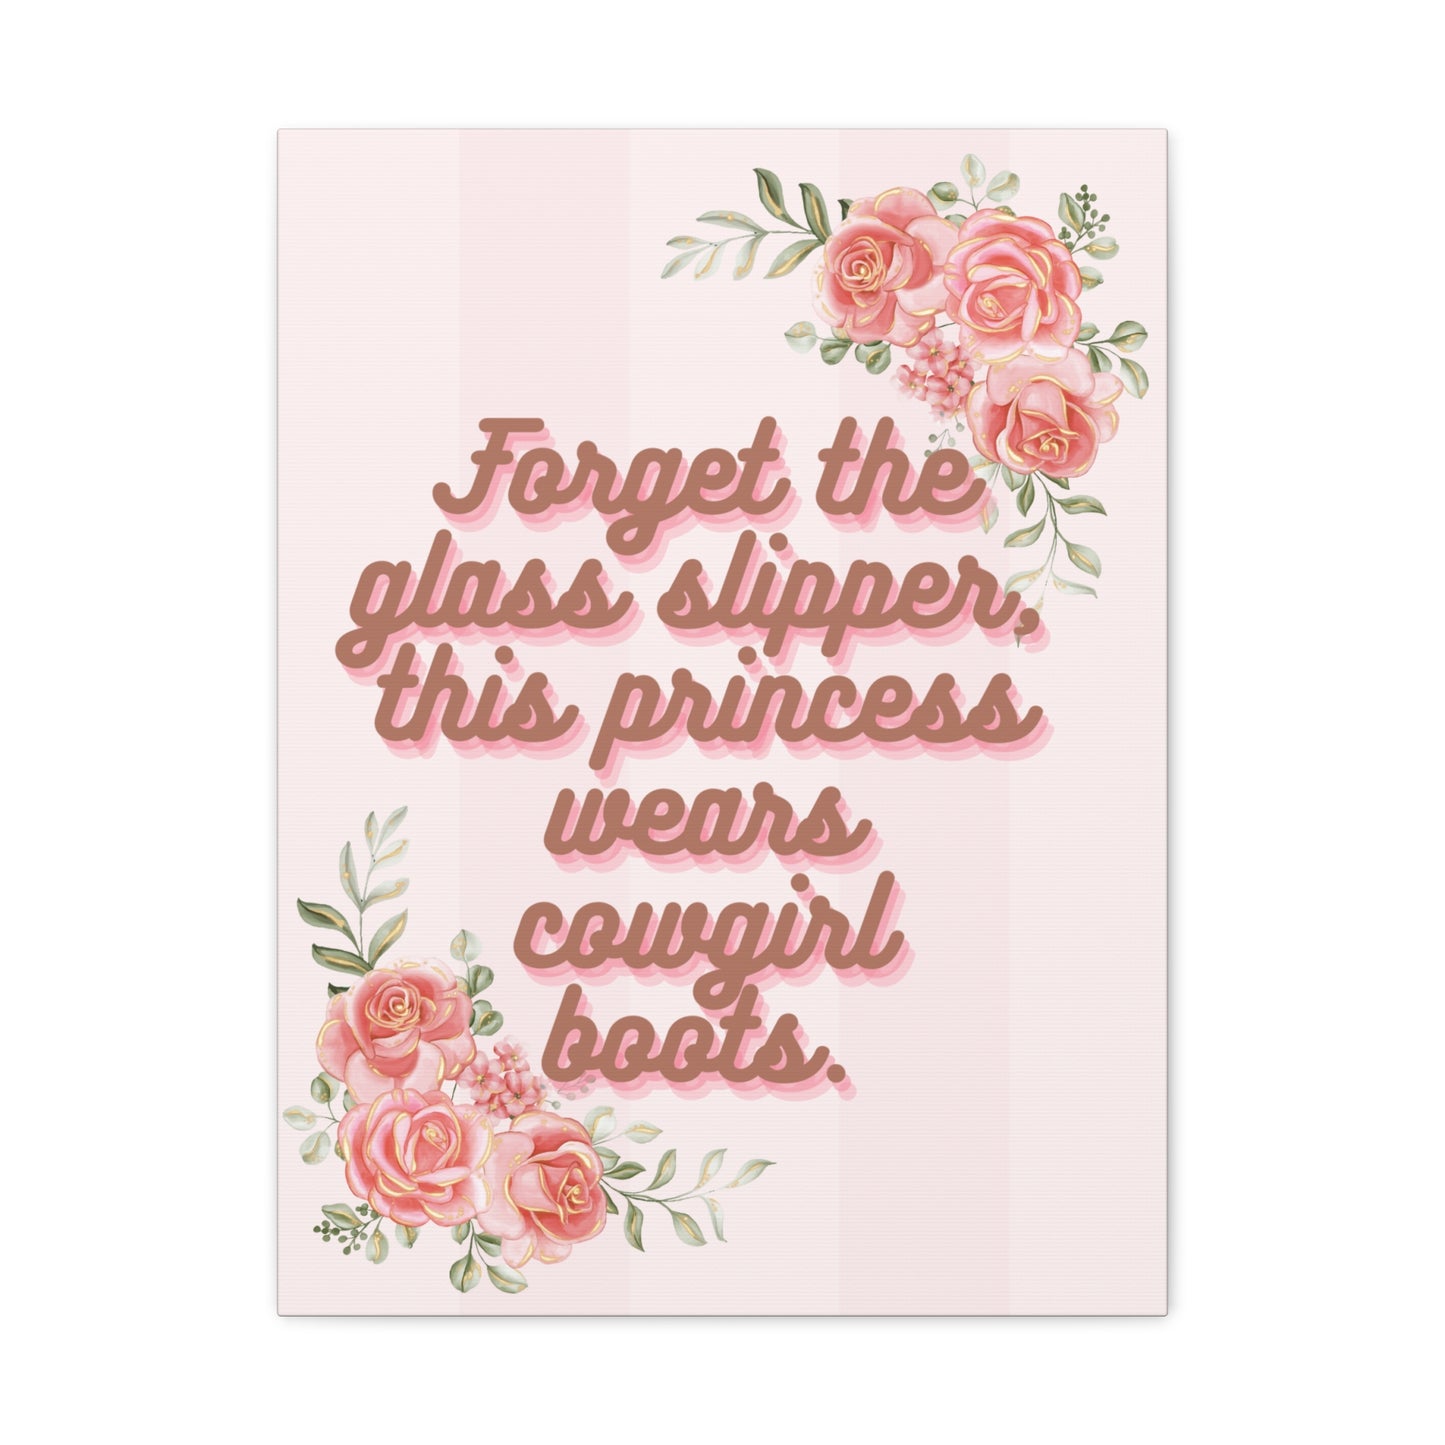 Pink Coquette Cowgirl Princess Glass Slippers Cowgirl Boots Pink Rose Canvas Wrapped Art Multiple Sizes